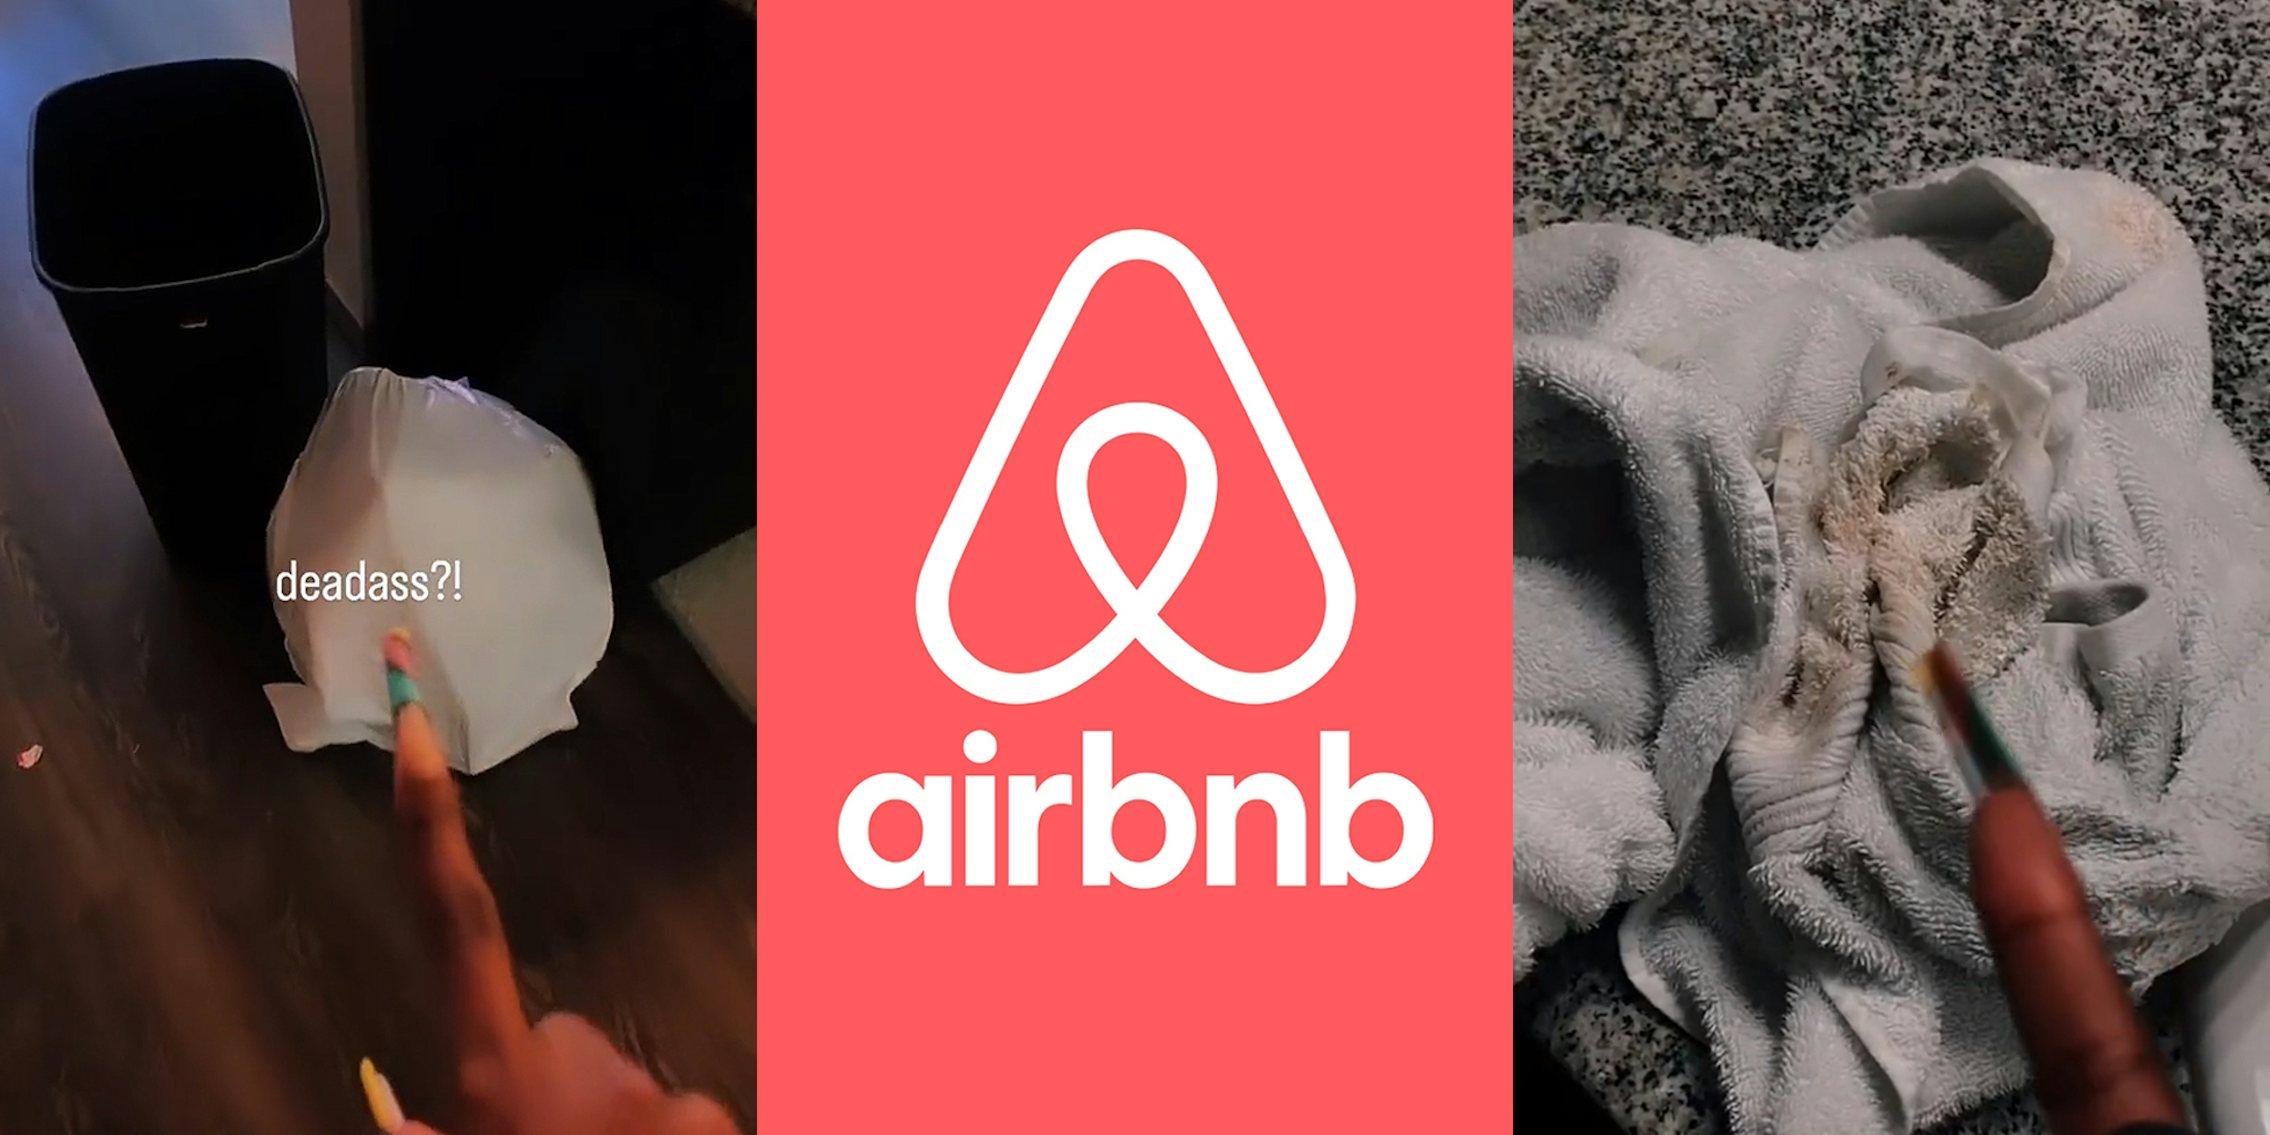 woman finger pointing to trash bag (l) Airbnb logo on red background (c) woman finger pointing to dirty towel (r)